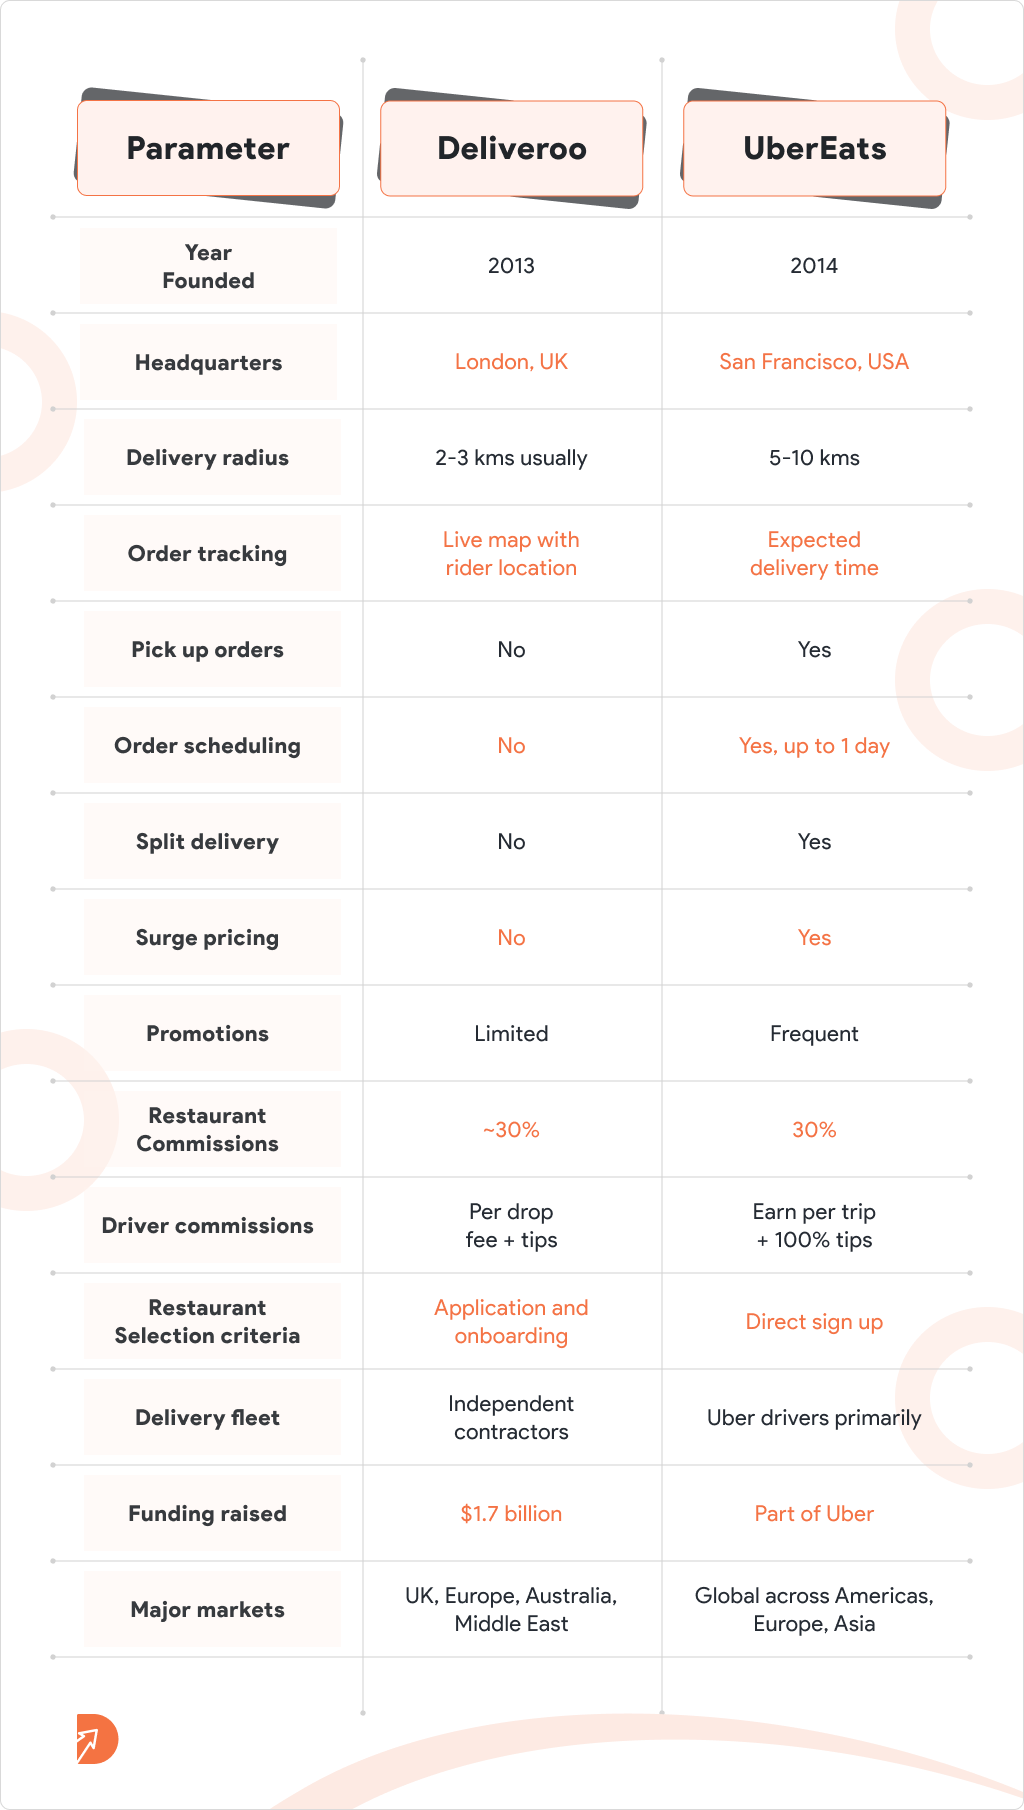 Side by side Comparison Across Some Key Parameters of Deliveroo vs Uber Eats